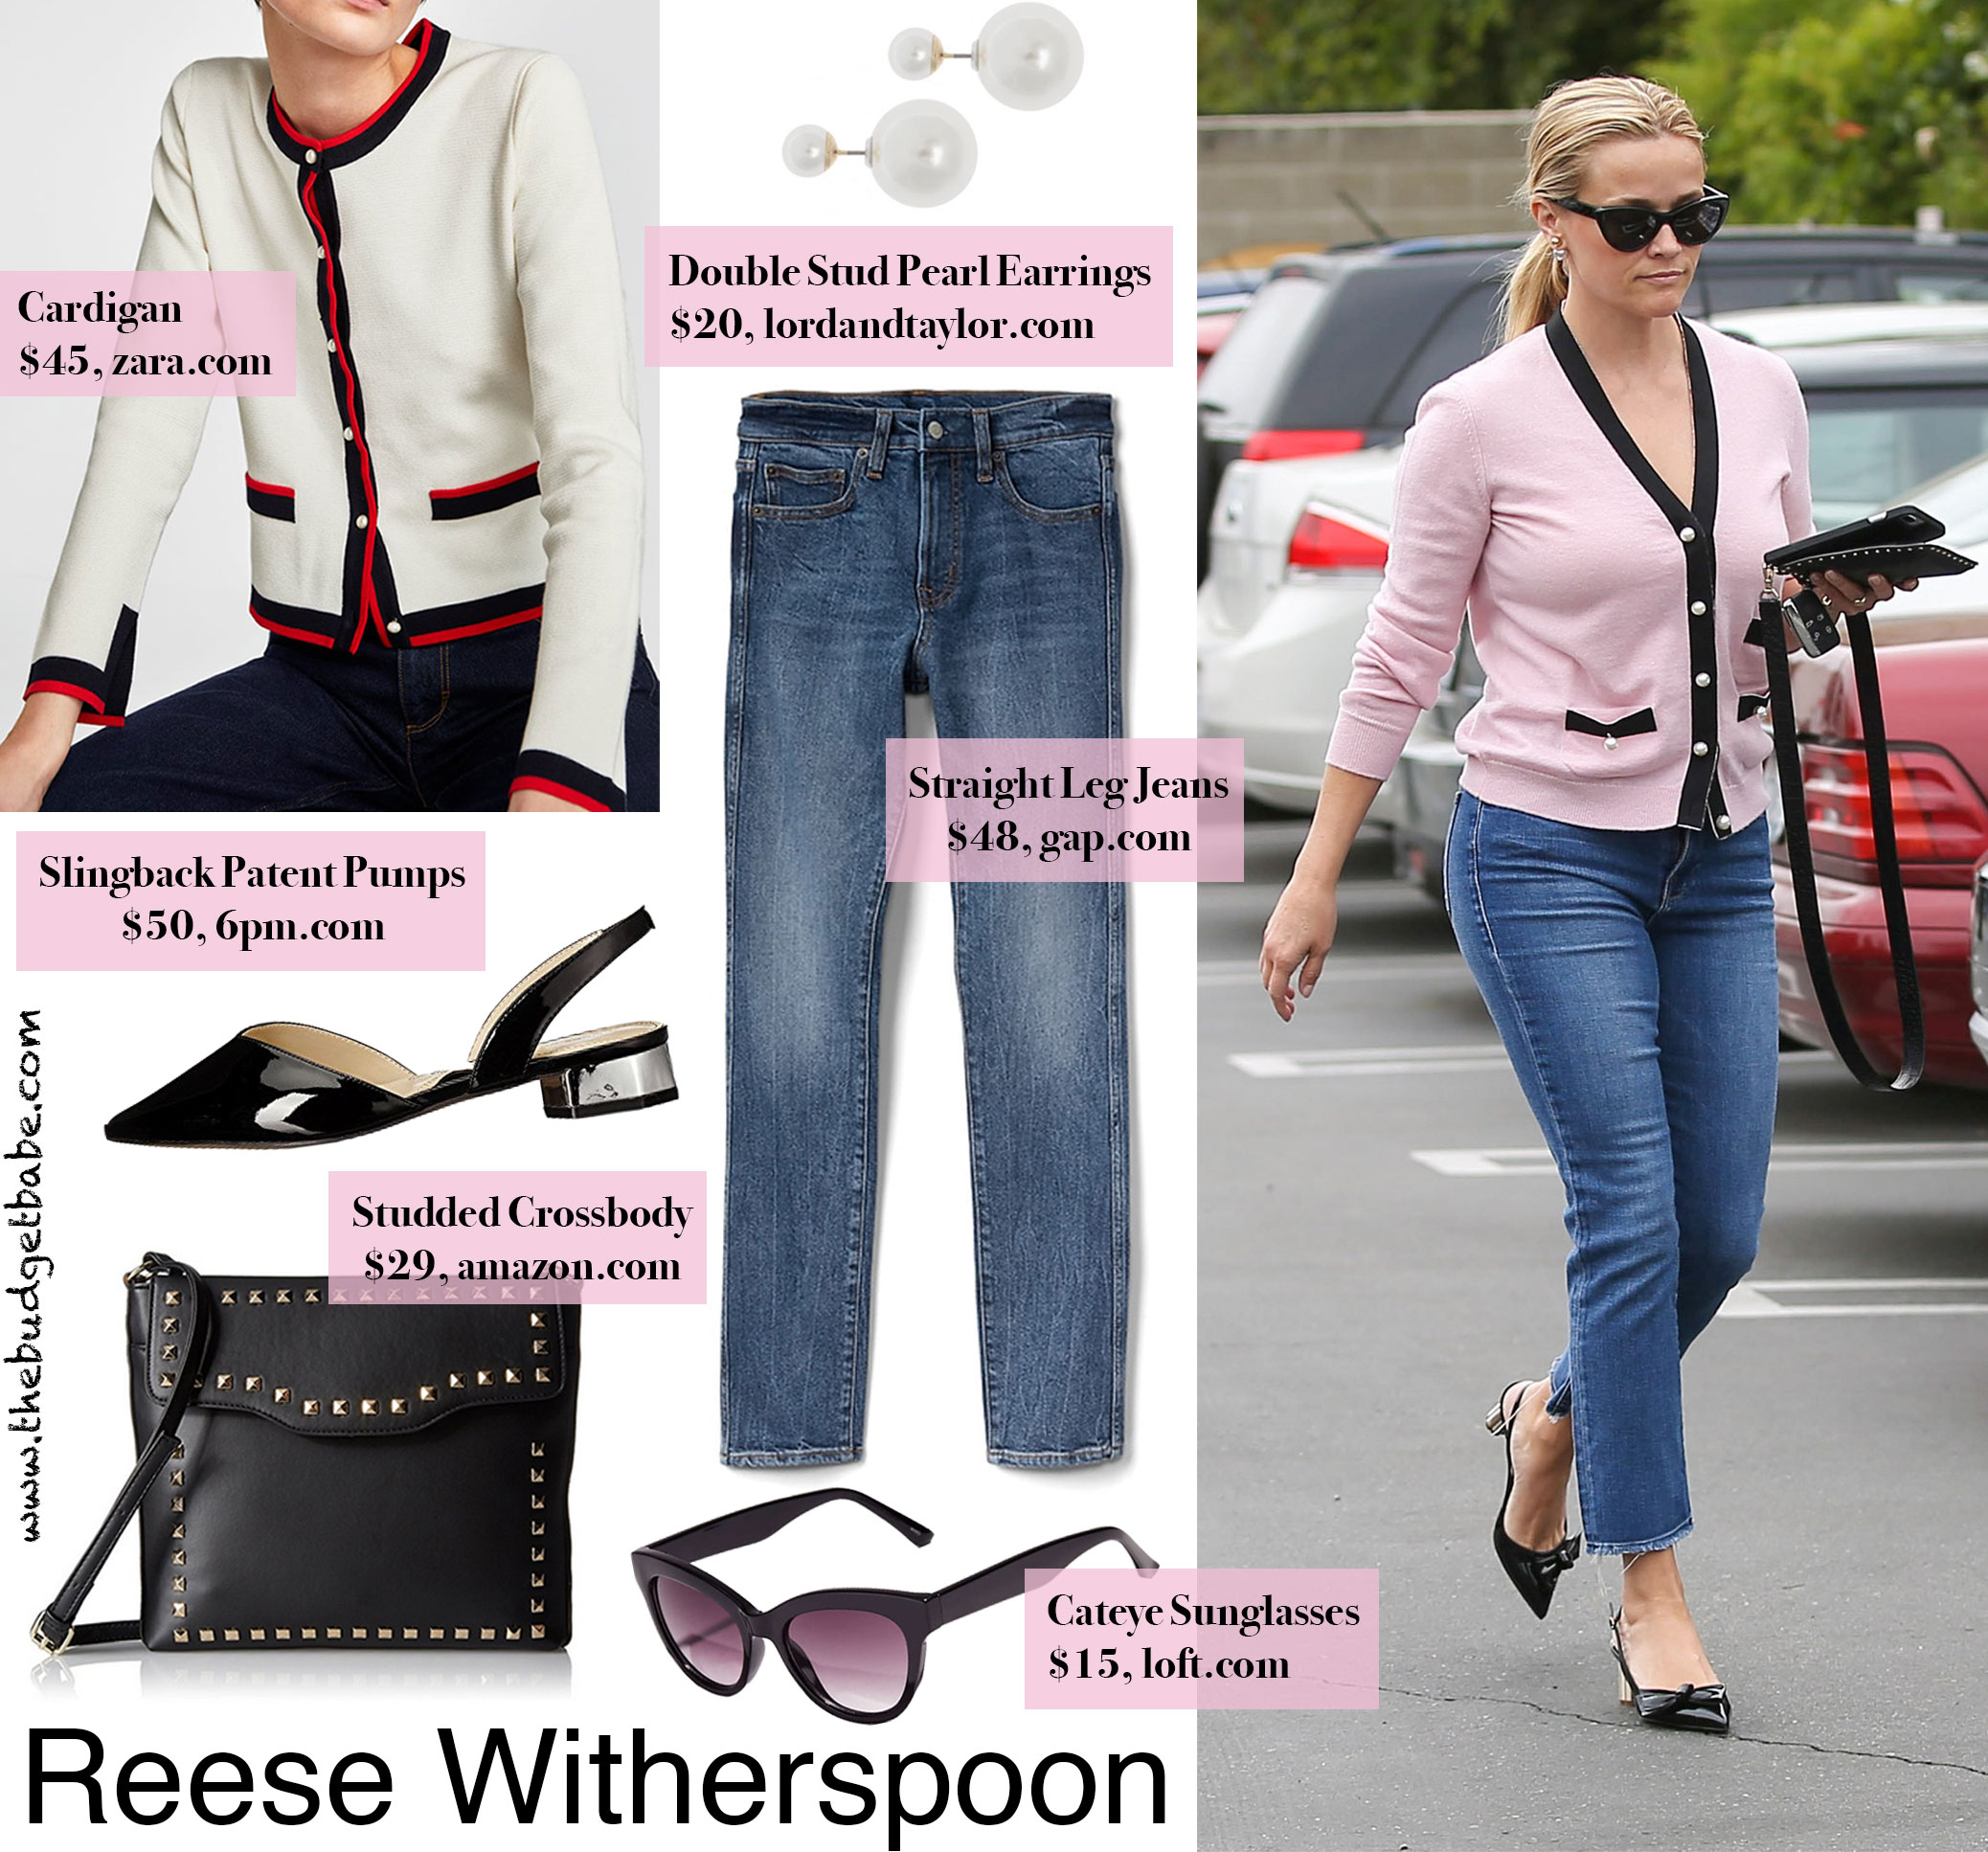 Reese Witherspoon Barneys Cardigan Look for Less